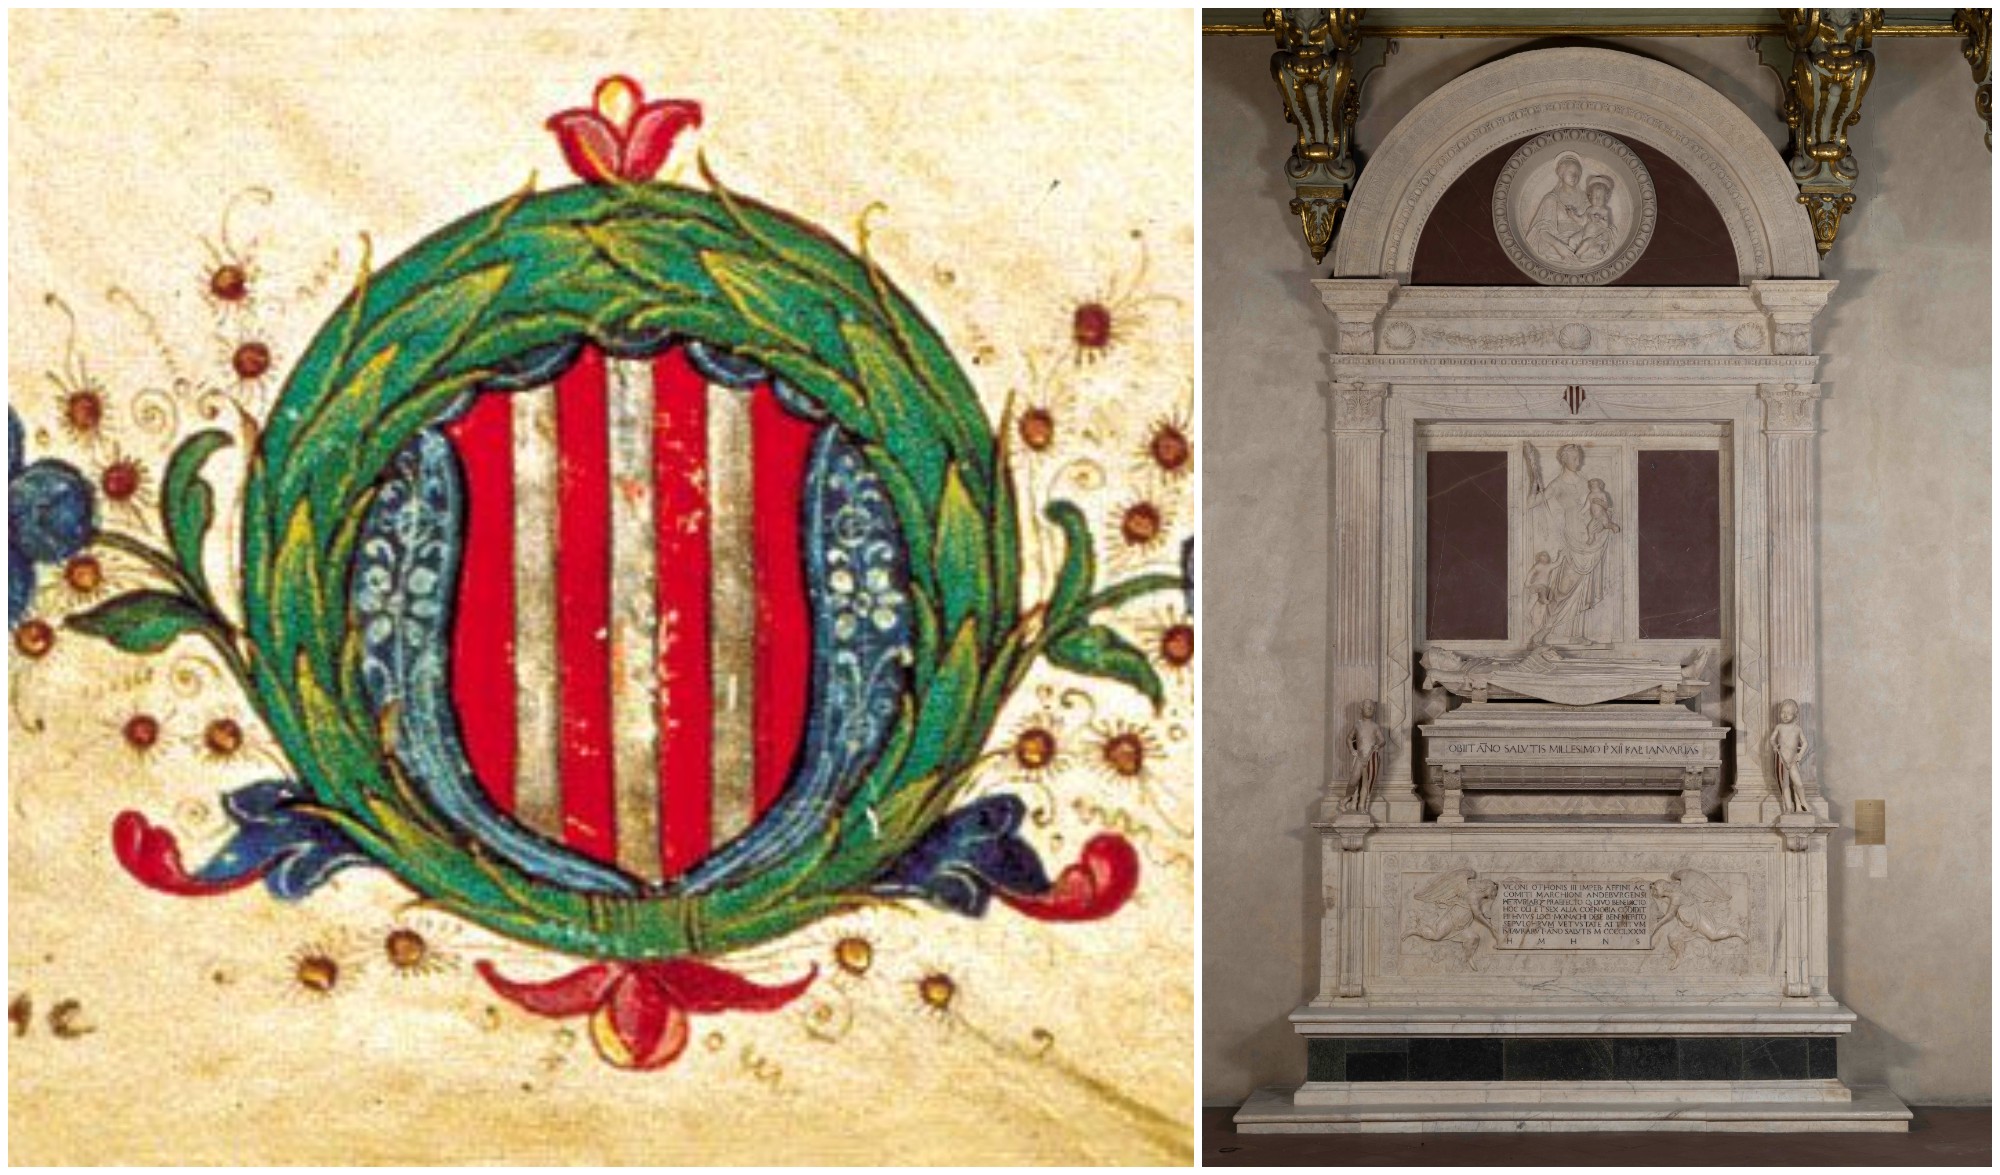 Funeral memorial to Hugh of Tuscany has been refurbished.  Washington’s coat of arms was proposed for the first draft of the United States flag – portrait